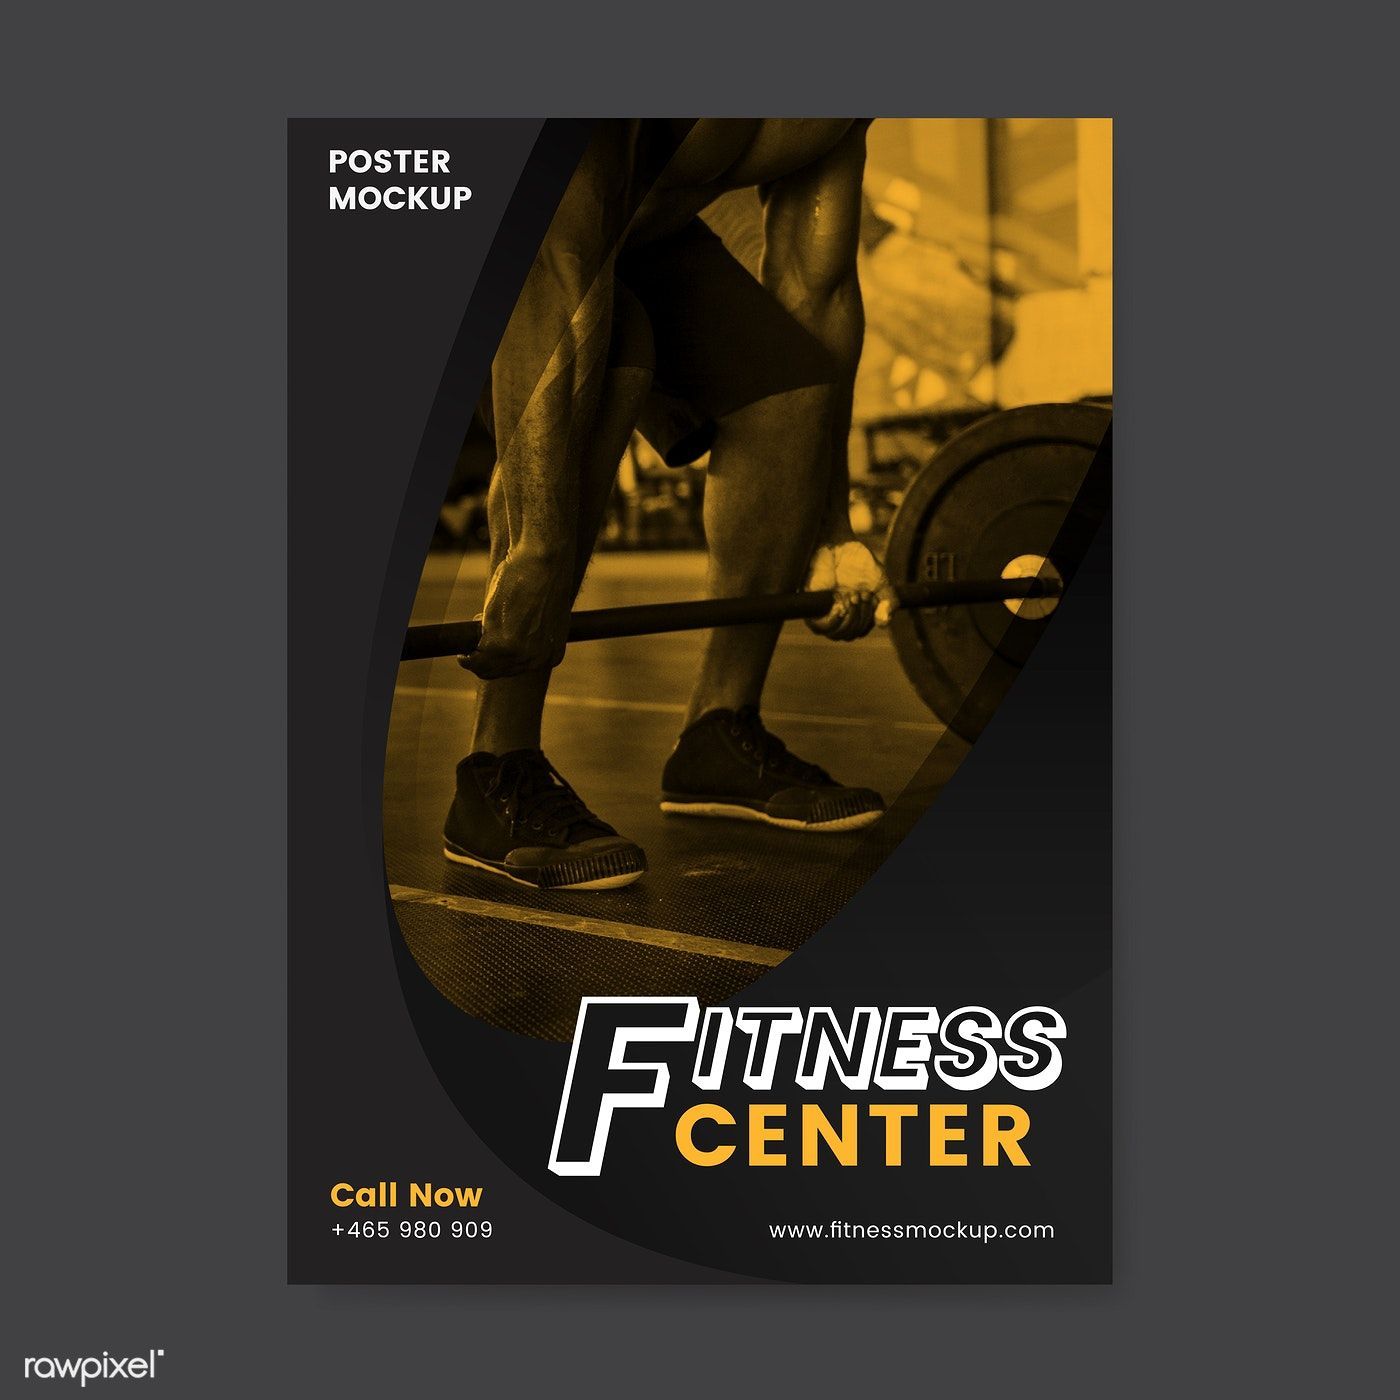 Download free vector of Fitness center promotional poster vector 533051 - Download free vector of Fitness center promotional poster vector 533051 -   10 fitness Poster vector ideas